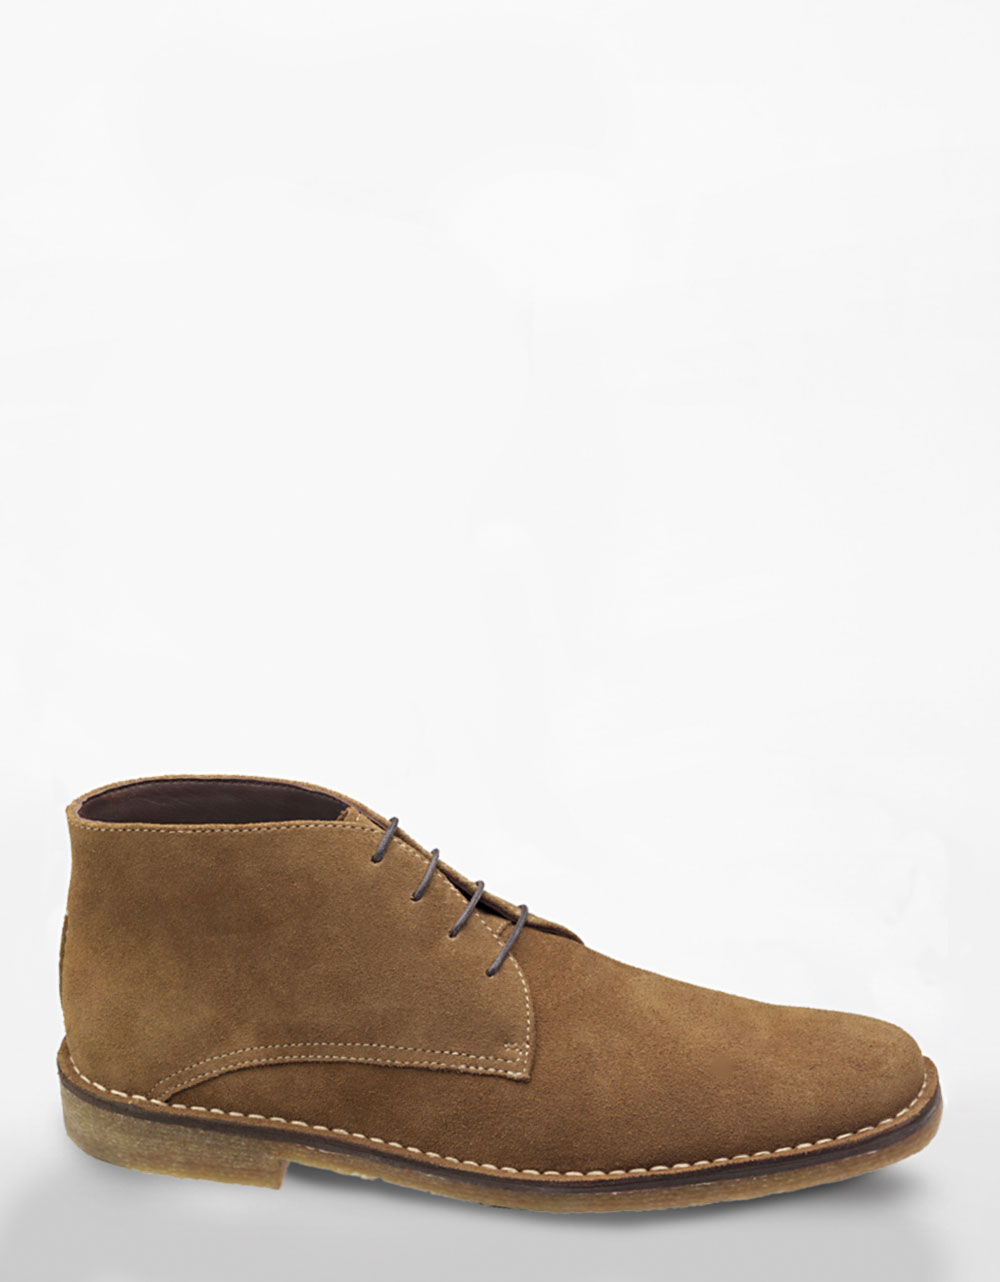 Johnston & Murphy Runnel Camel Suede Chukka Boots in for Men (camel) | Lyst